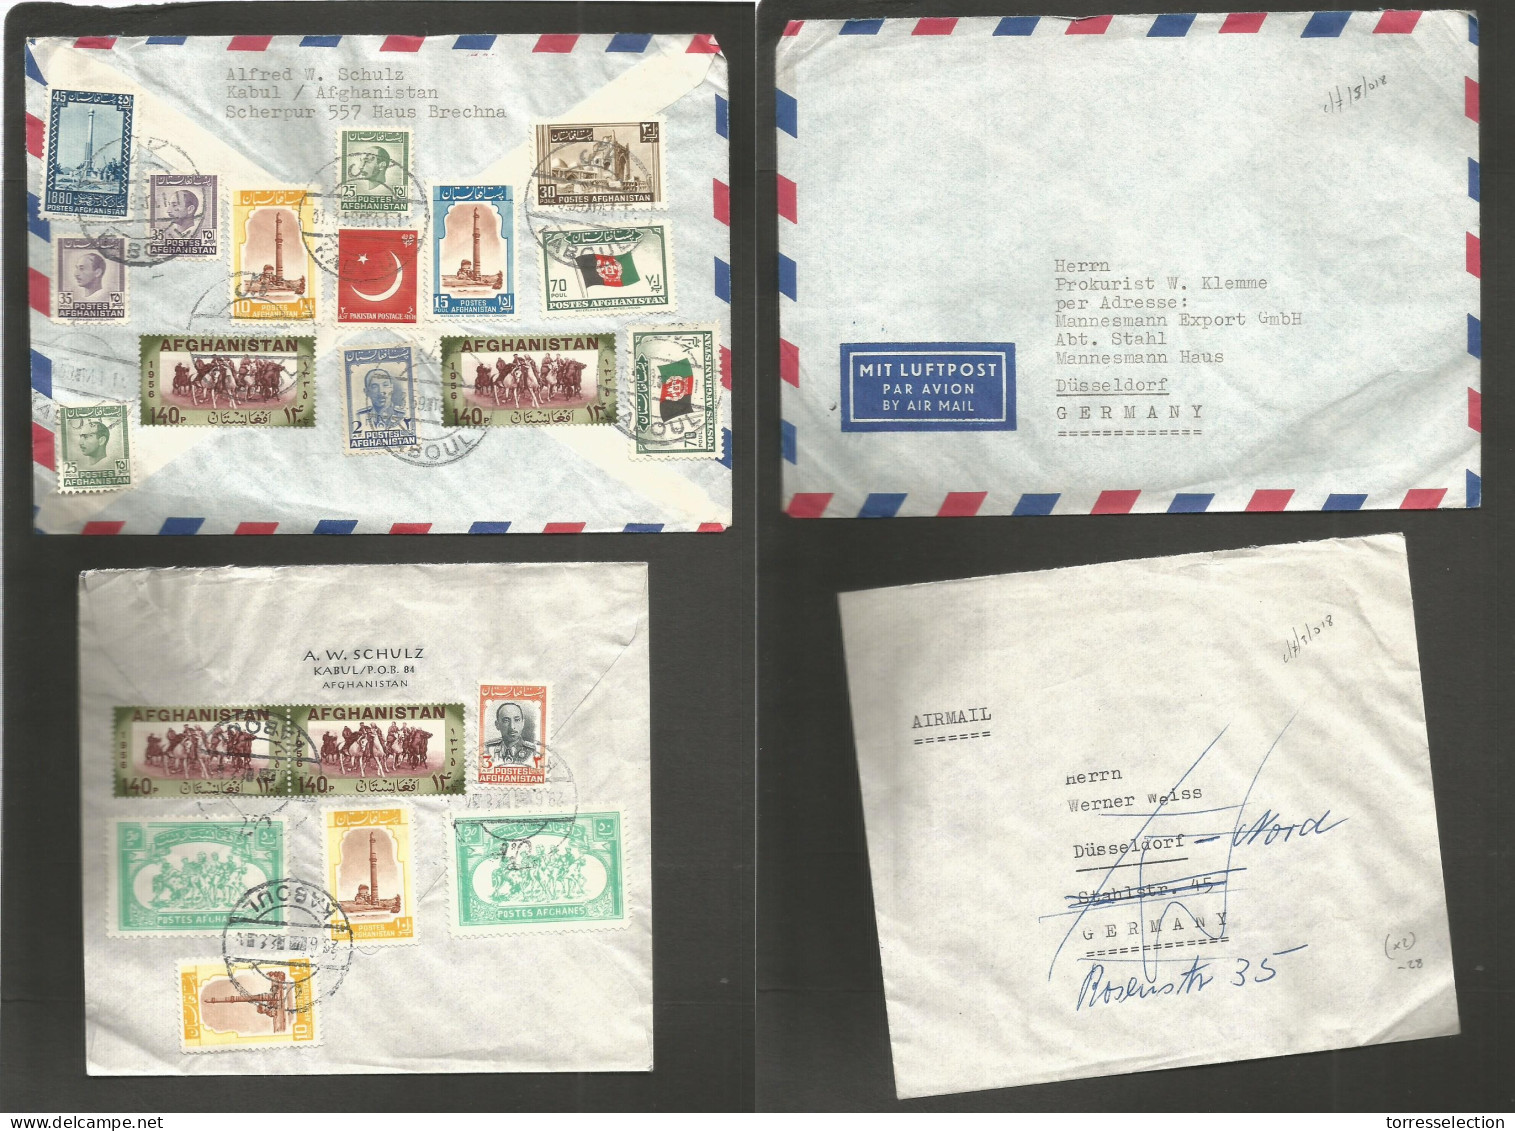 AFGHANISTAN. 1959 (31 March) Kaboul - Germany. Pair Of Multifkd Airmail Envelope Usages. Fine And Attractive. - Afganistán